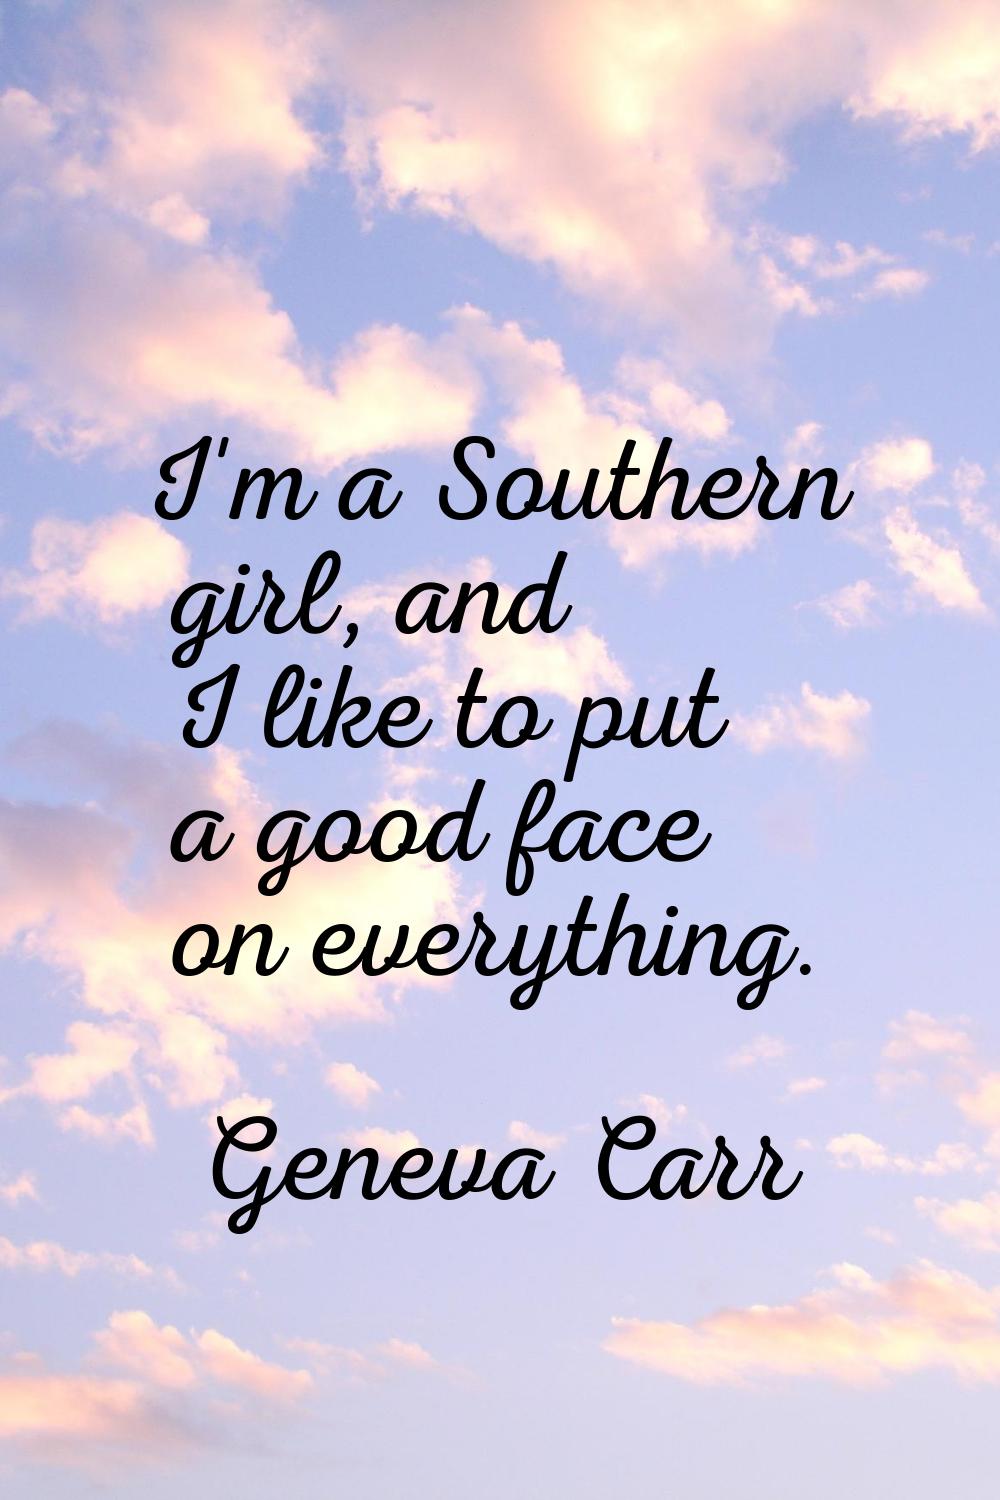 I'm a Southern girl, and I like to put a good face on everything.